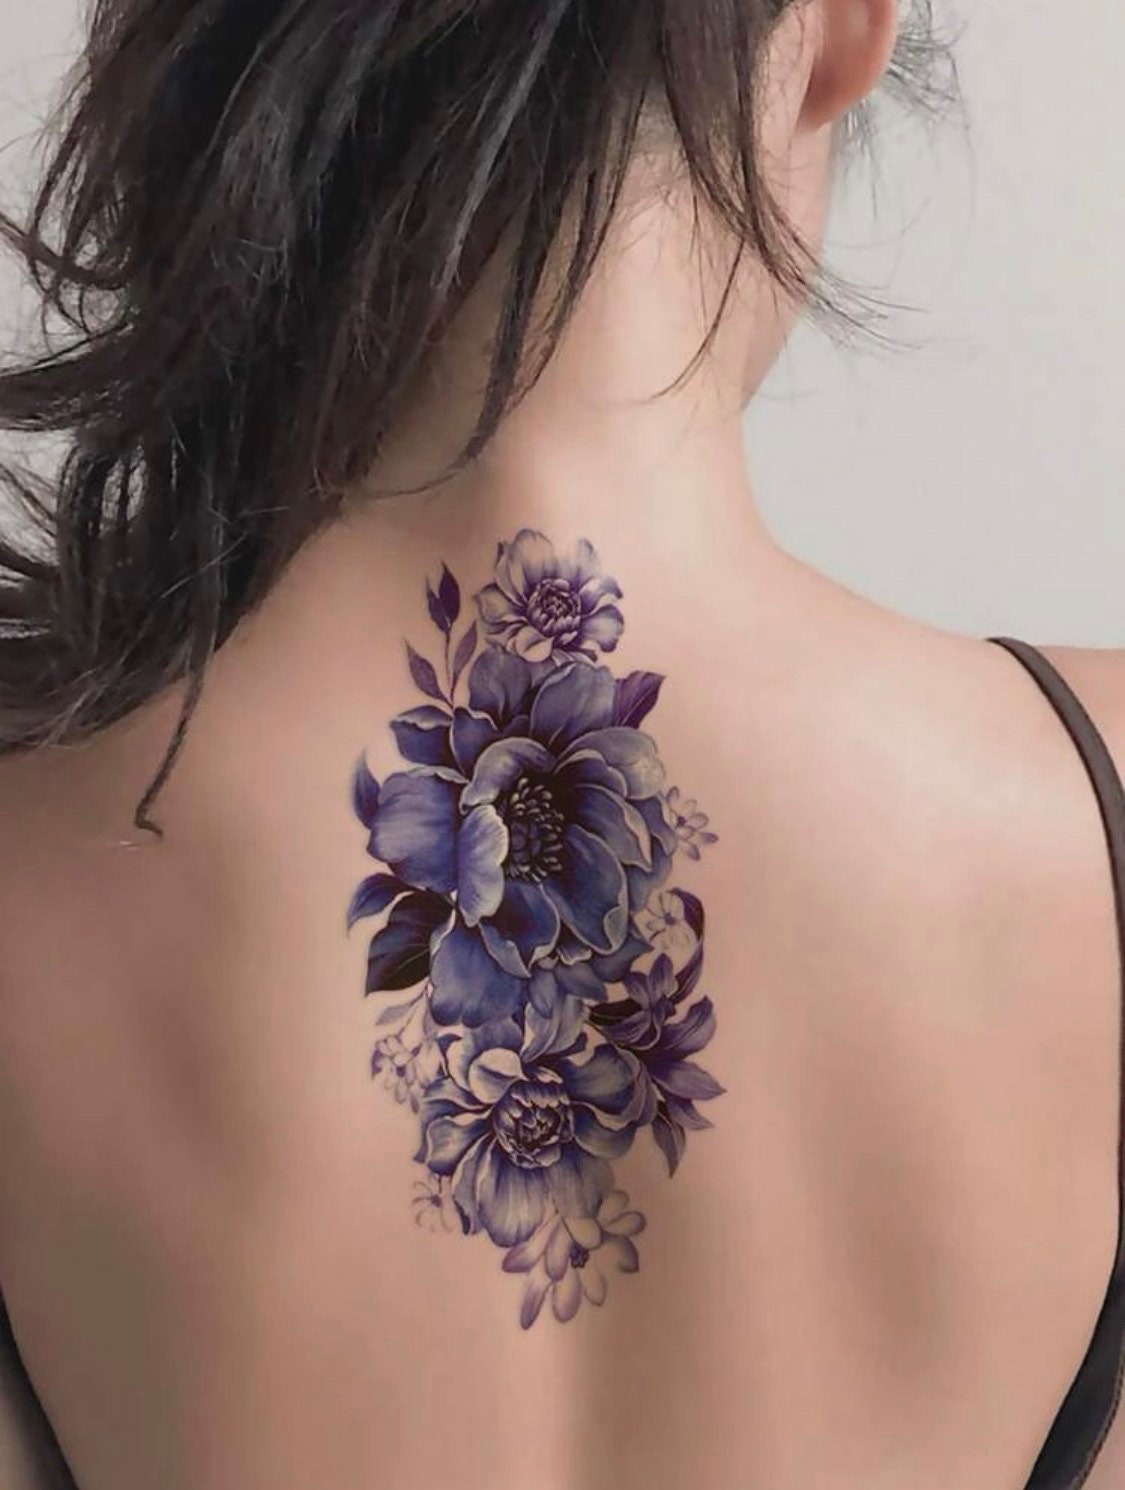 Buy Violet Flower Temporary Tattoo Piece Floral Tattoo Online in India   Etsy